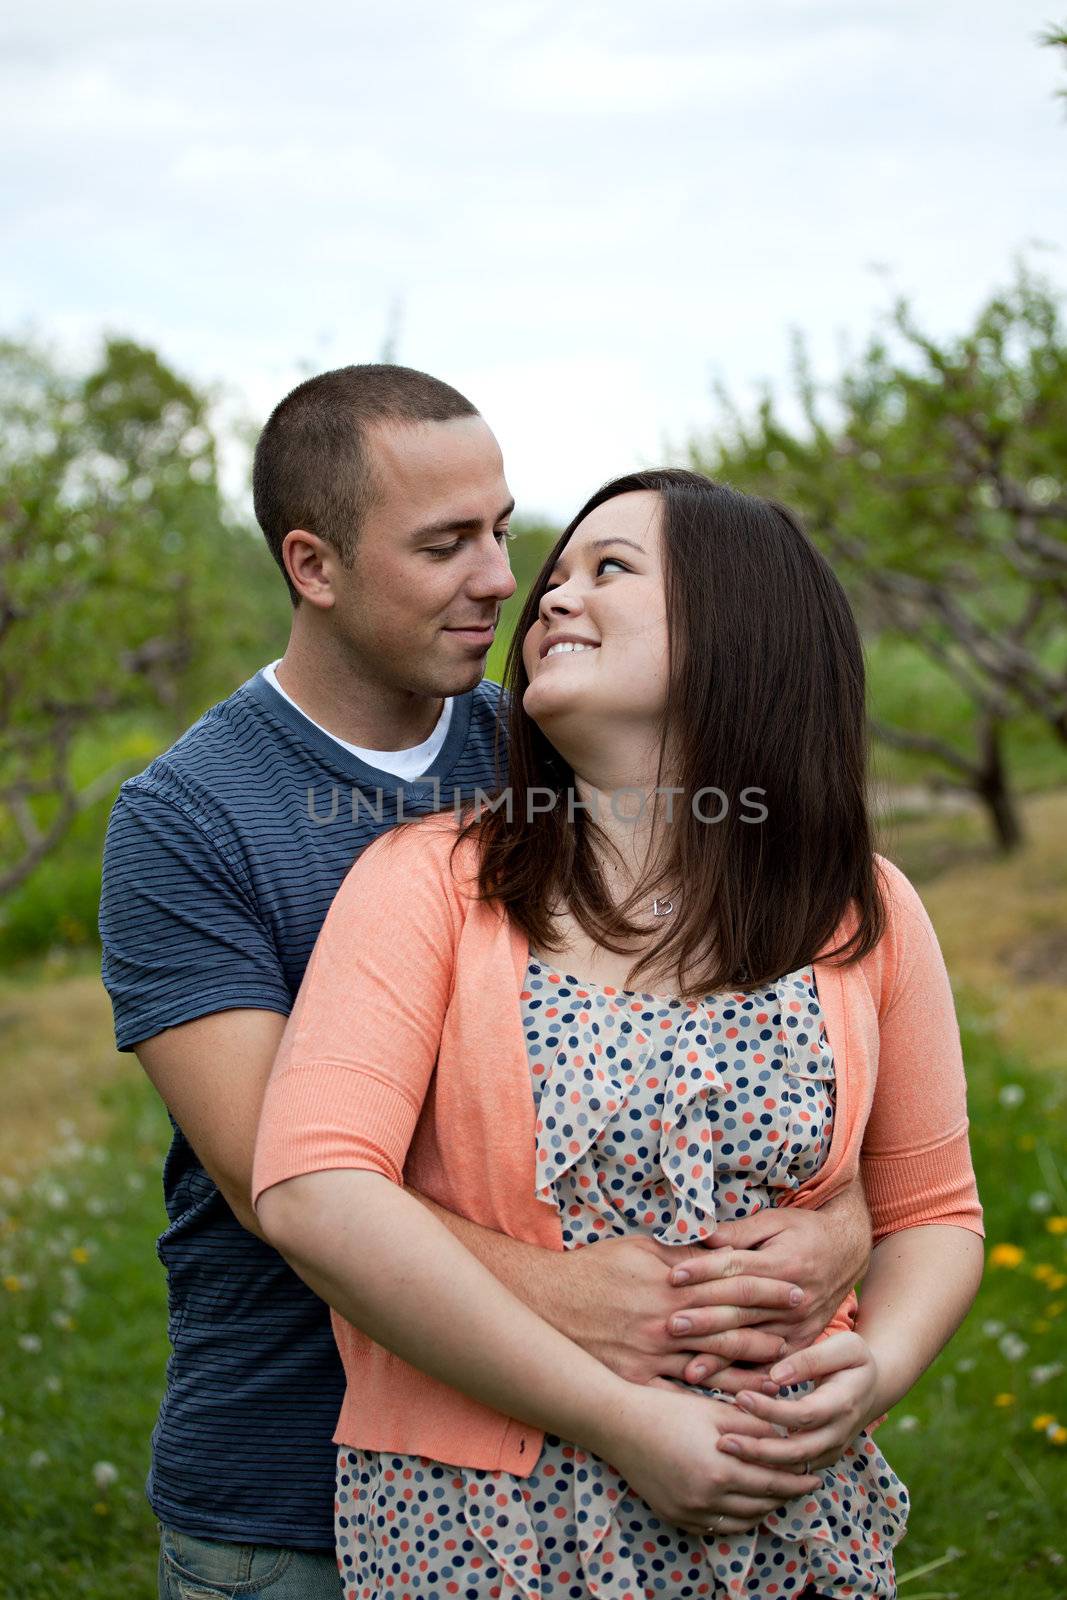 Young happy couple enjoying each others company outdoors walking through an orchard.